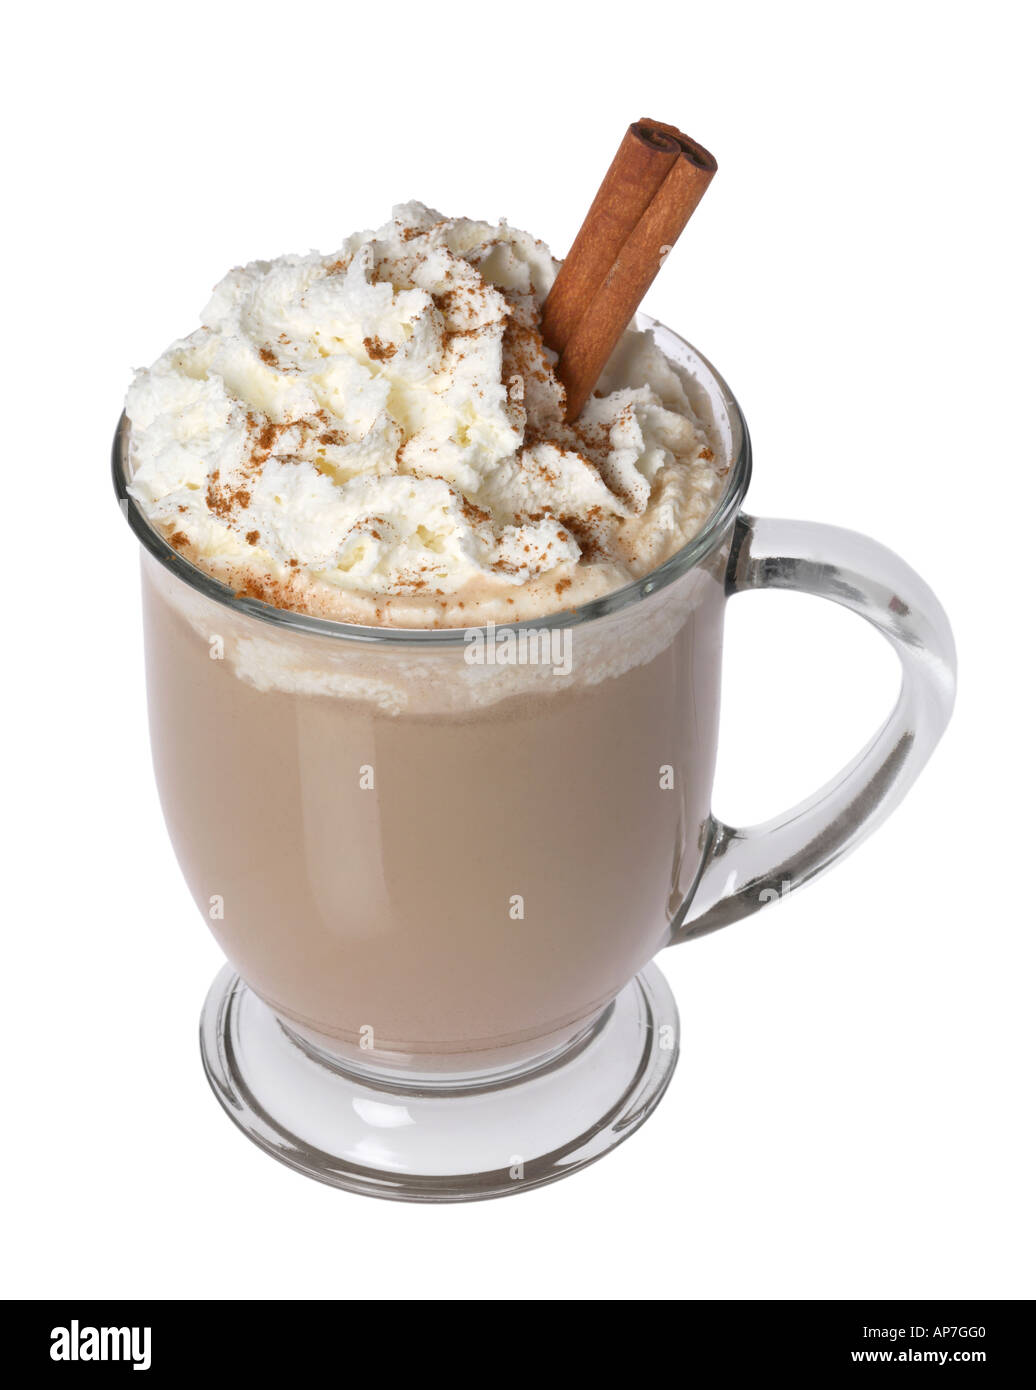 Latte with whipped cream and cinnamon stick Stock Photo